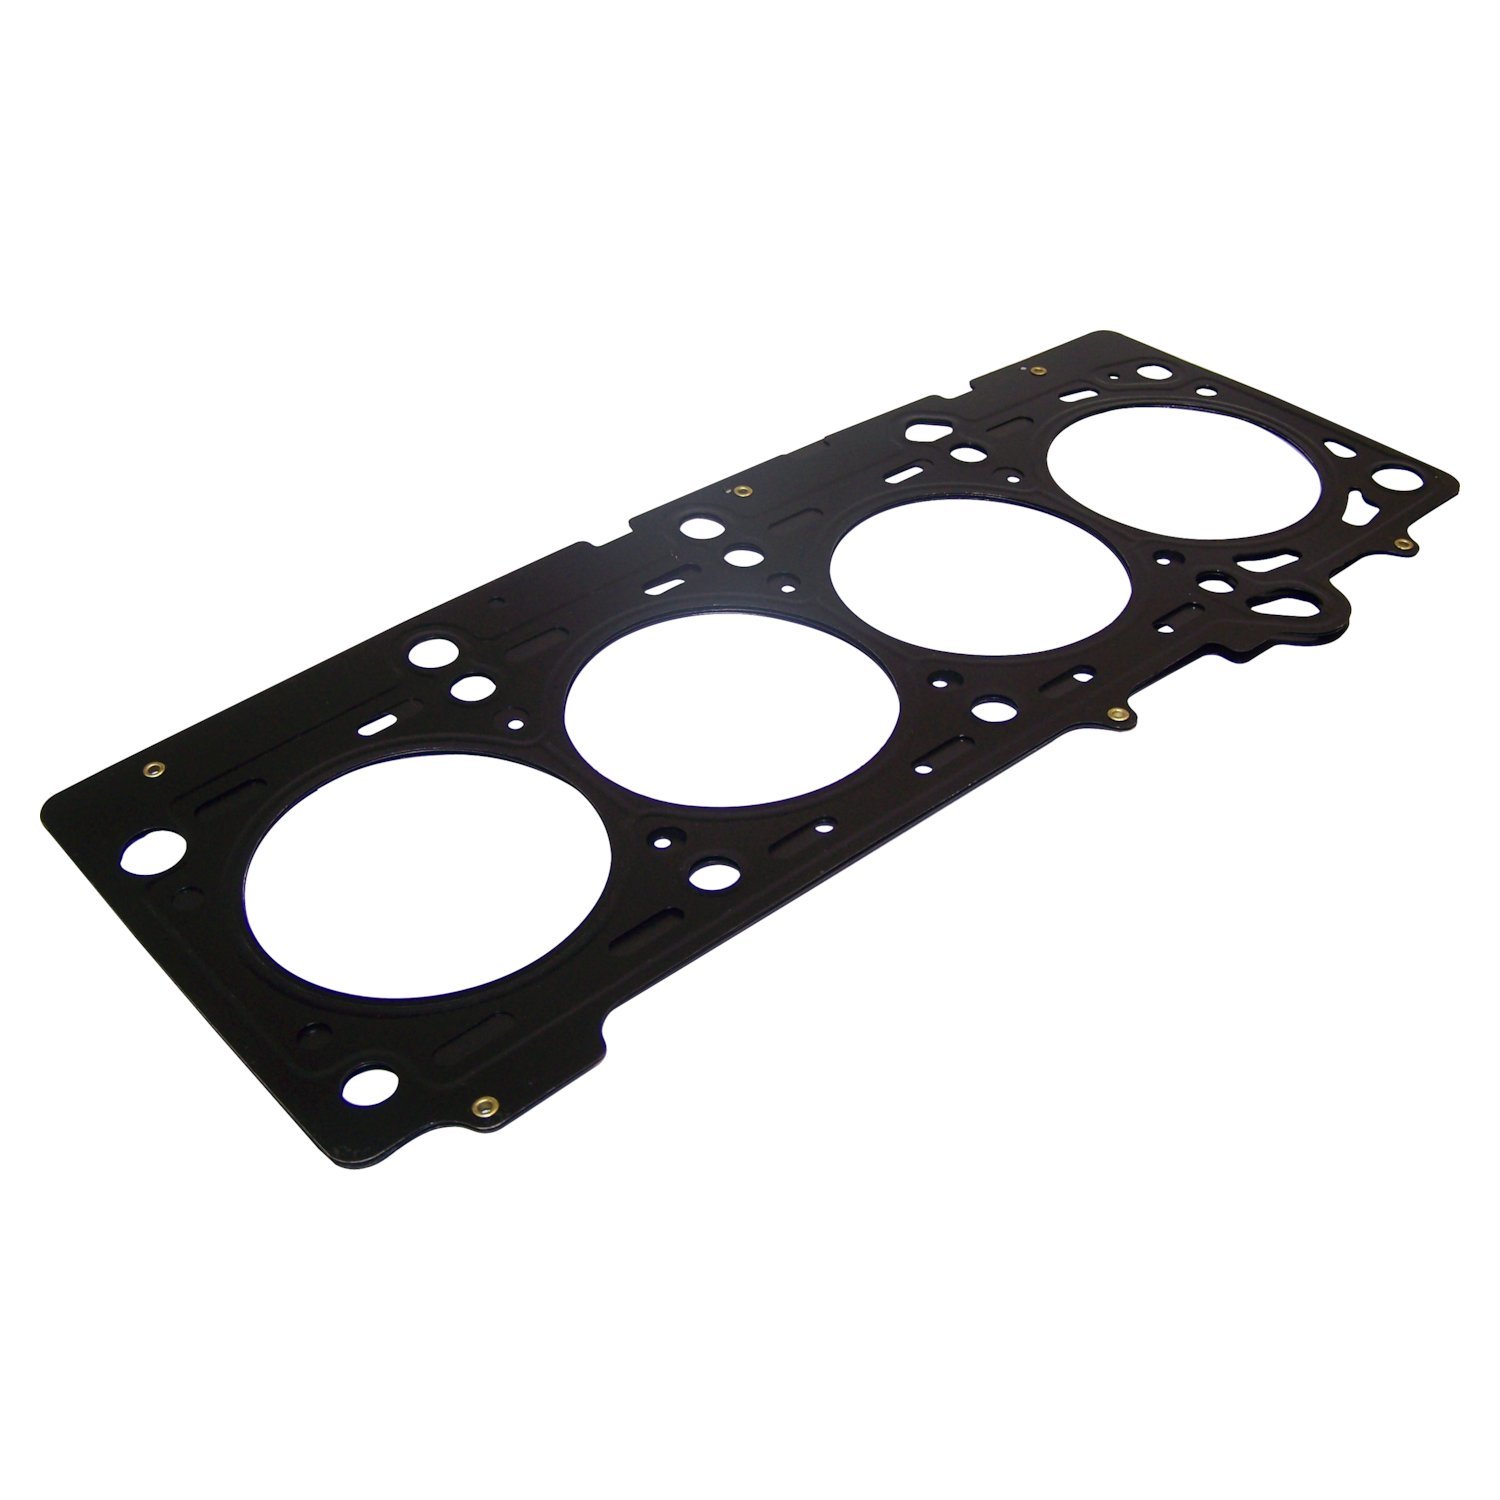 Engine Cylinder Head Gasket for Various Jeep, Dodge, Chrysler, Plymouth Vehicles